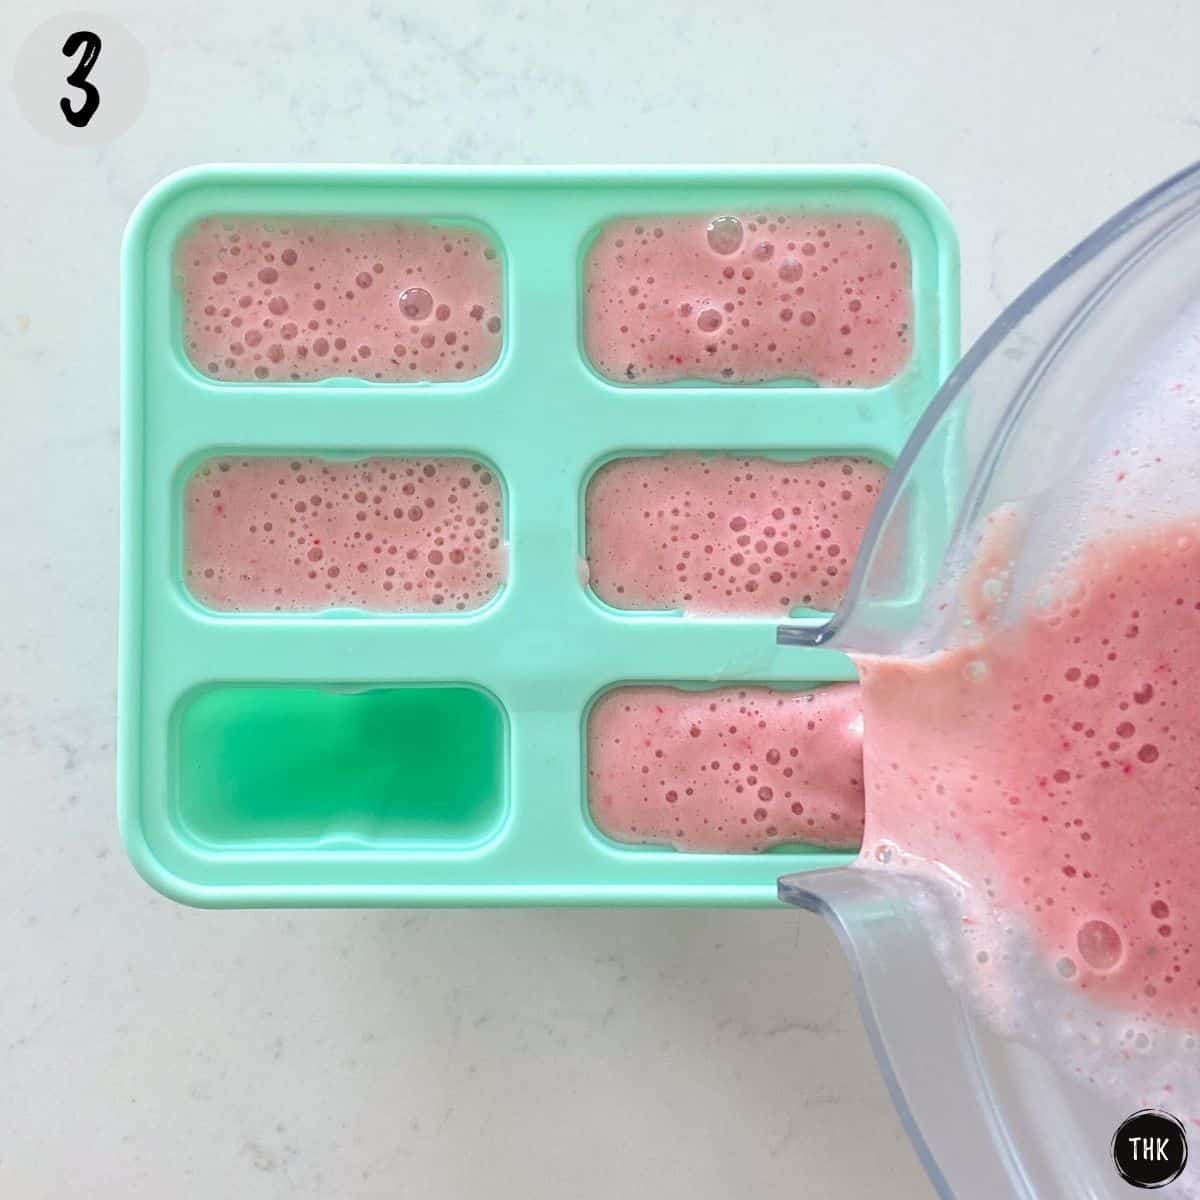 Pour pink liquid from blender into popsicle mold.